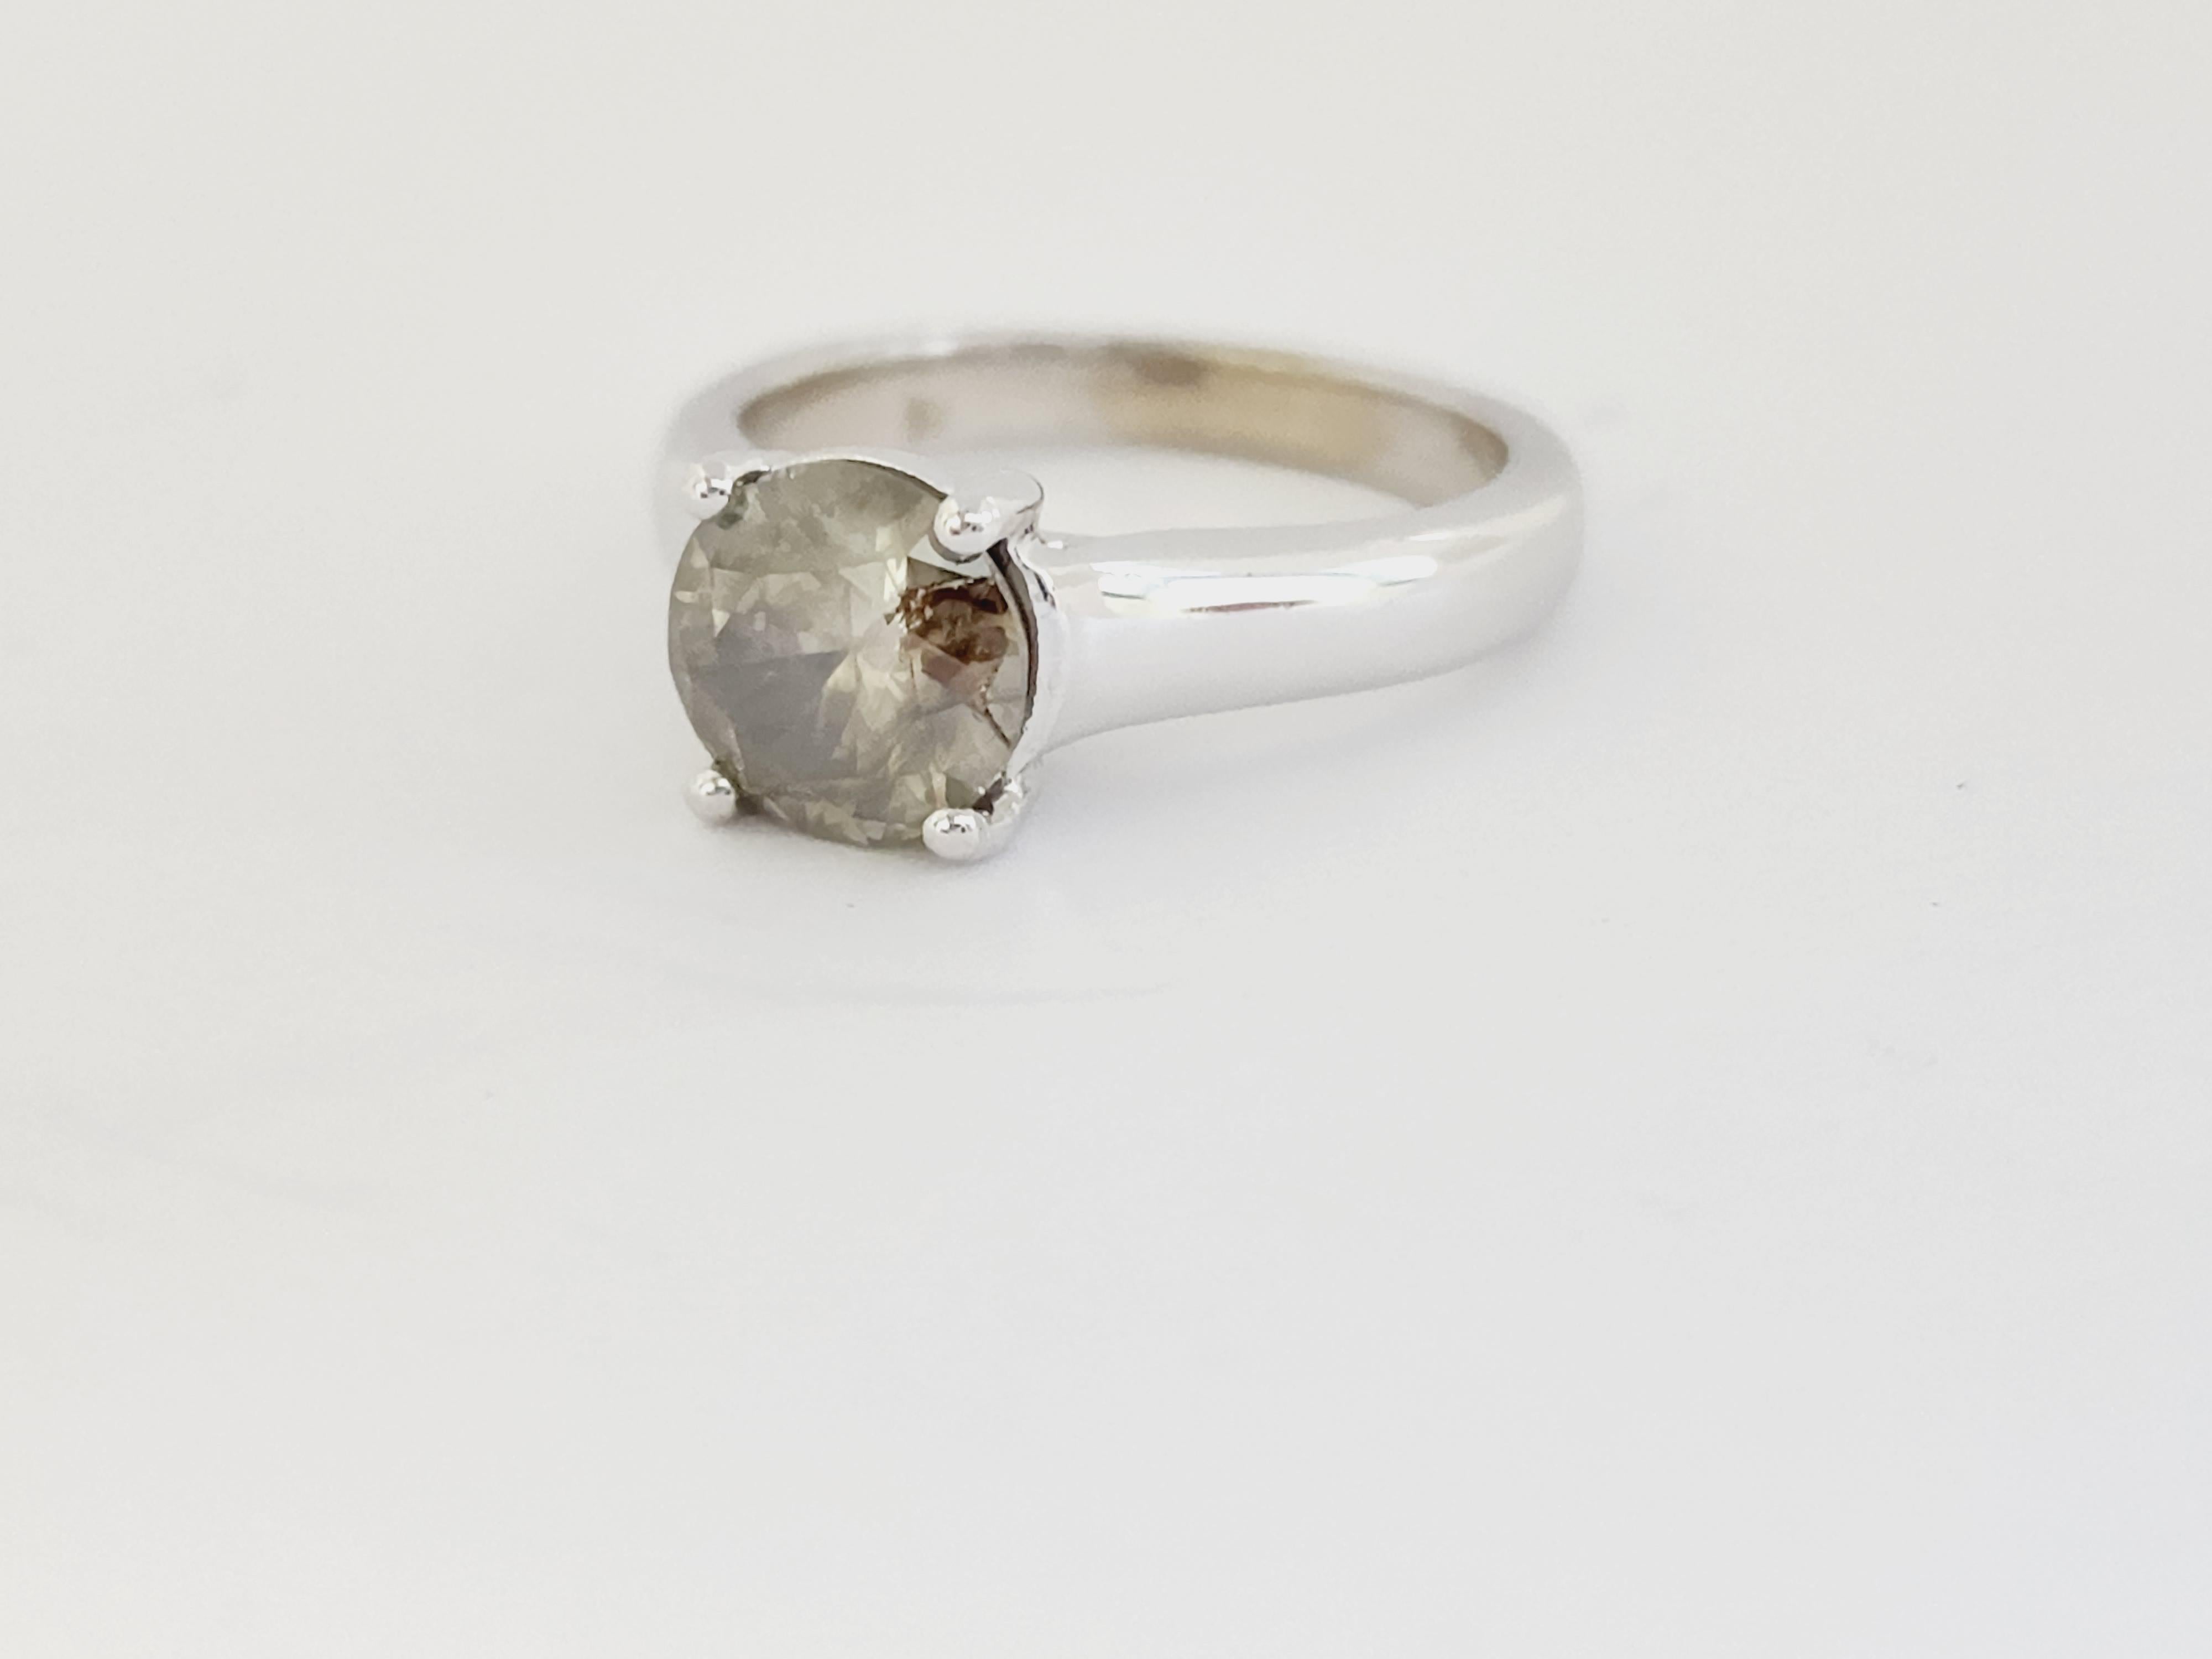 GIA 1.84 Carat Fancy Dark Brown Round Diamond Ring 14 Karat White Gold In New Condition For Sale In Great Neck, NY